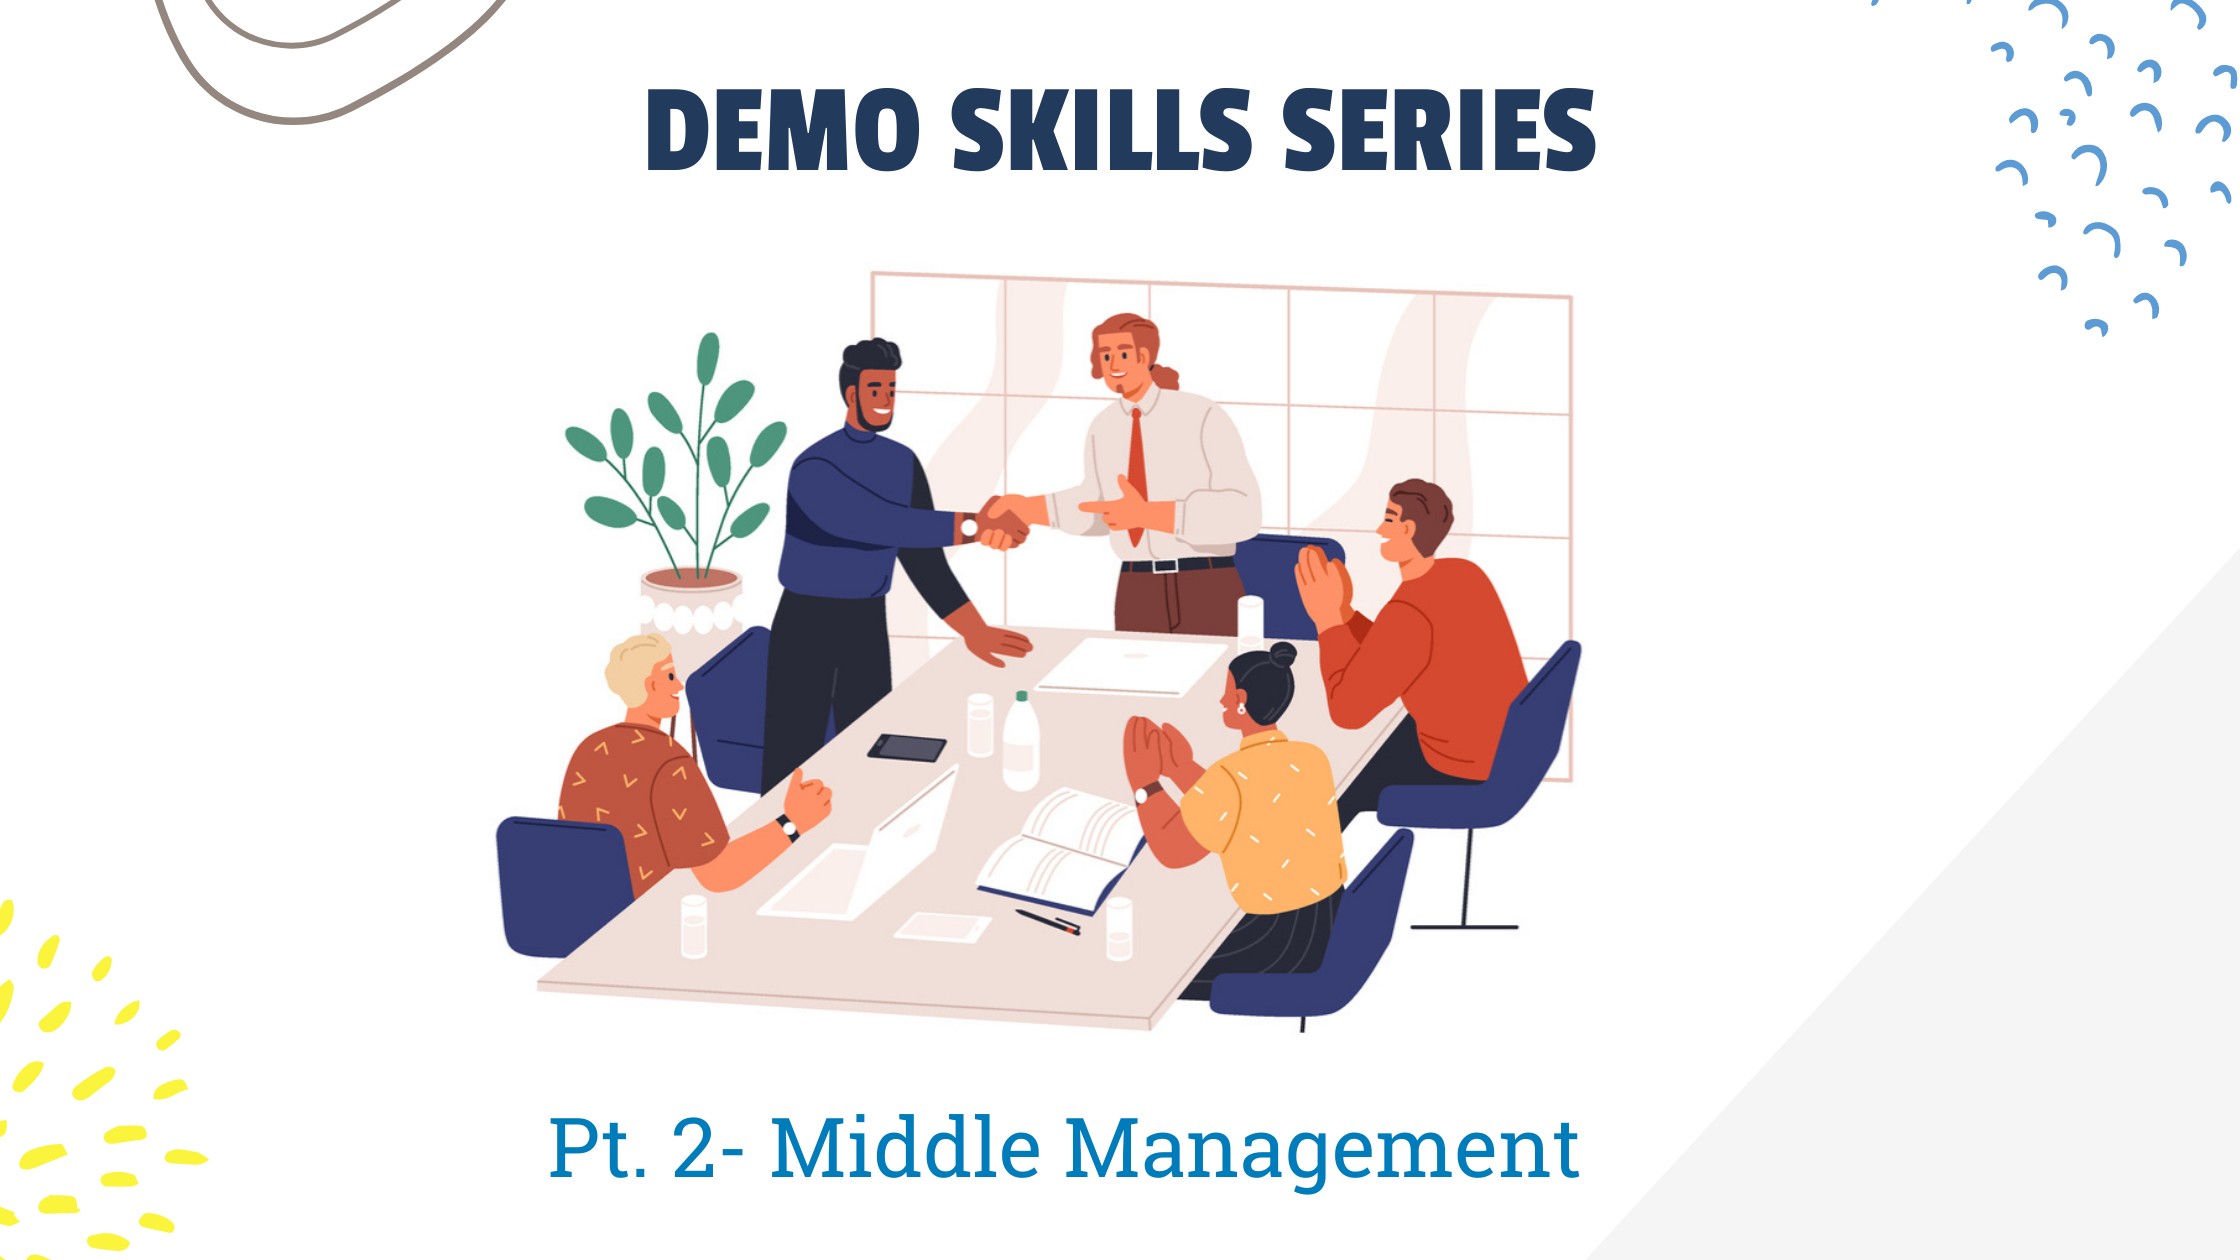 Demo Skills- How to Demo to Middle Management